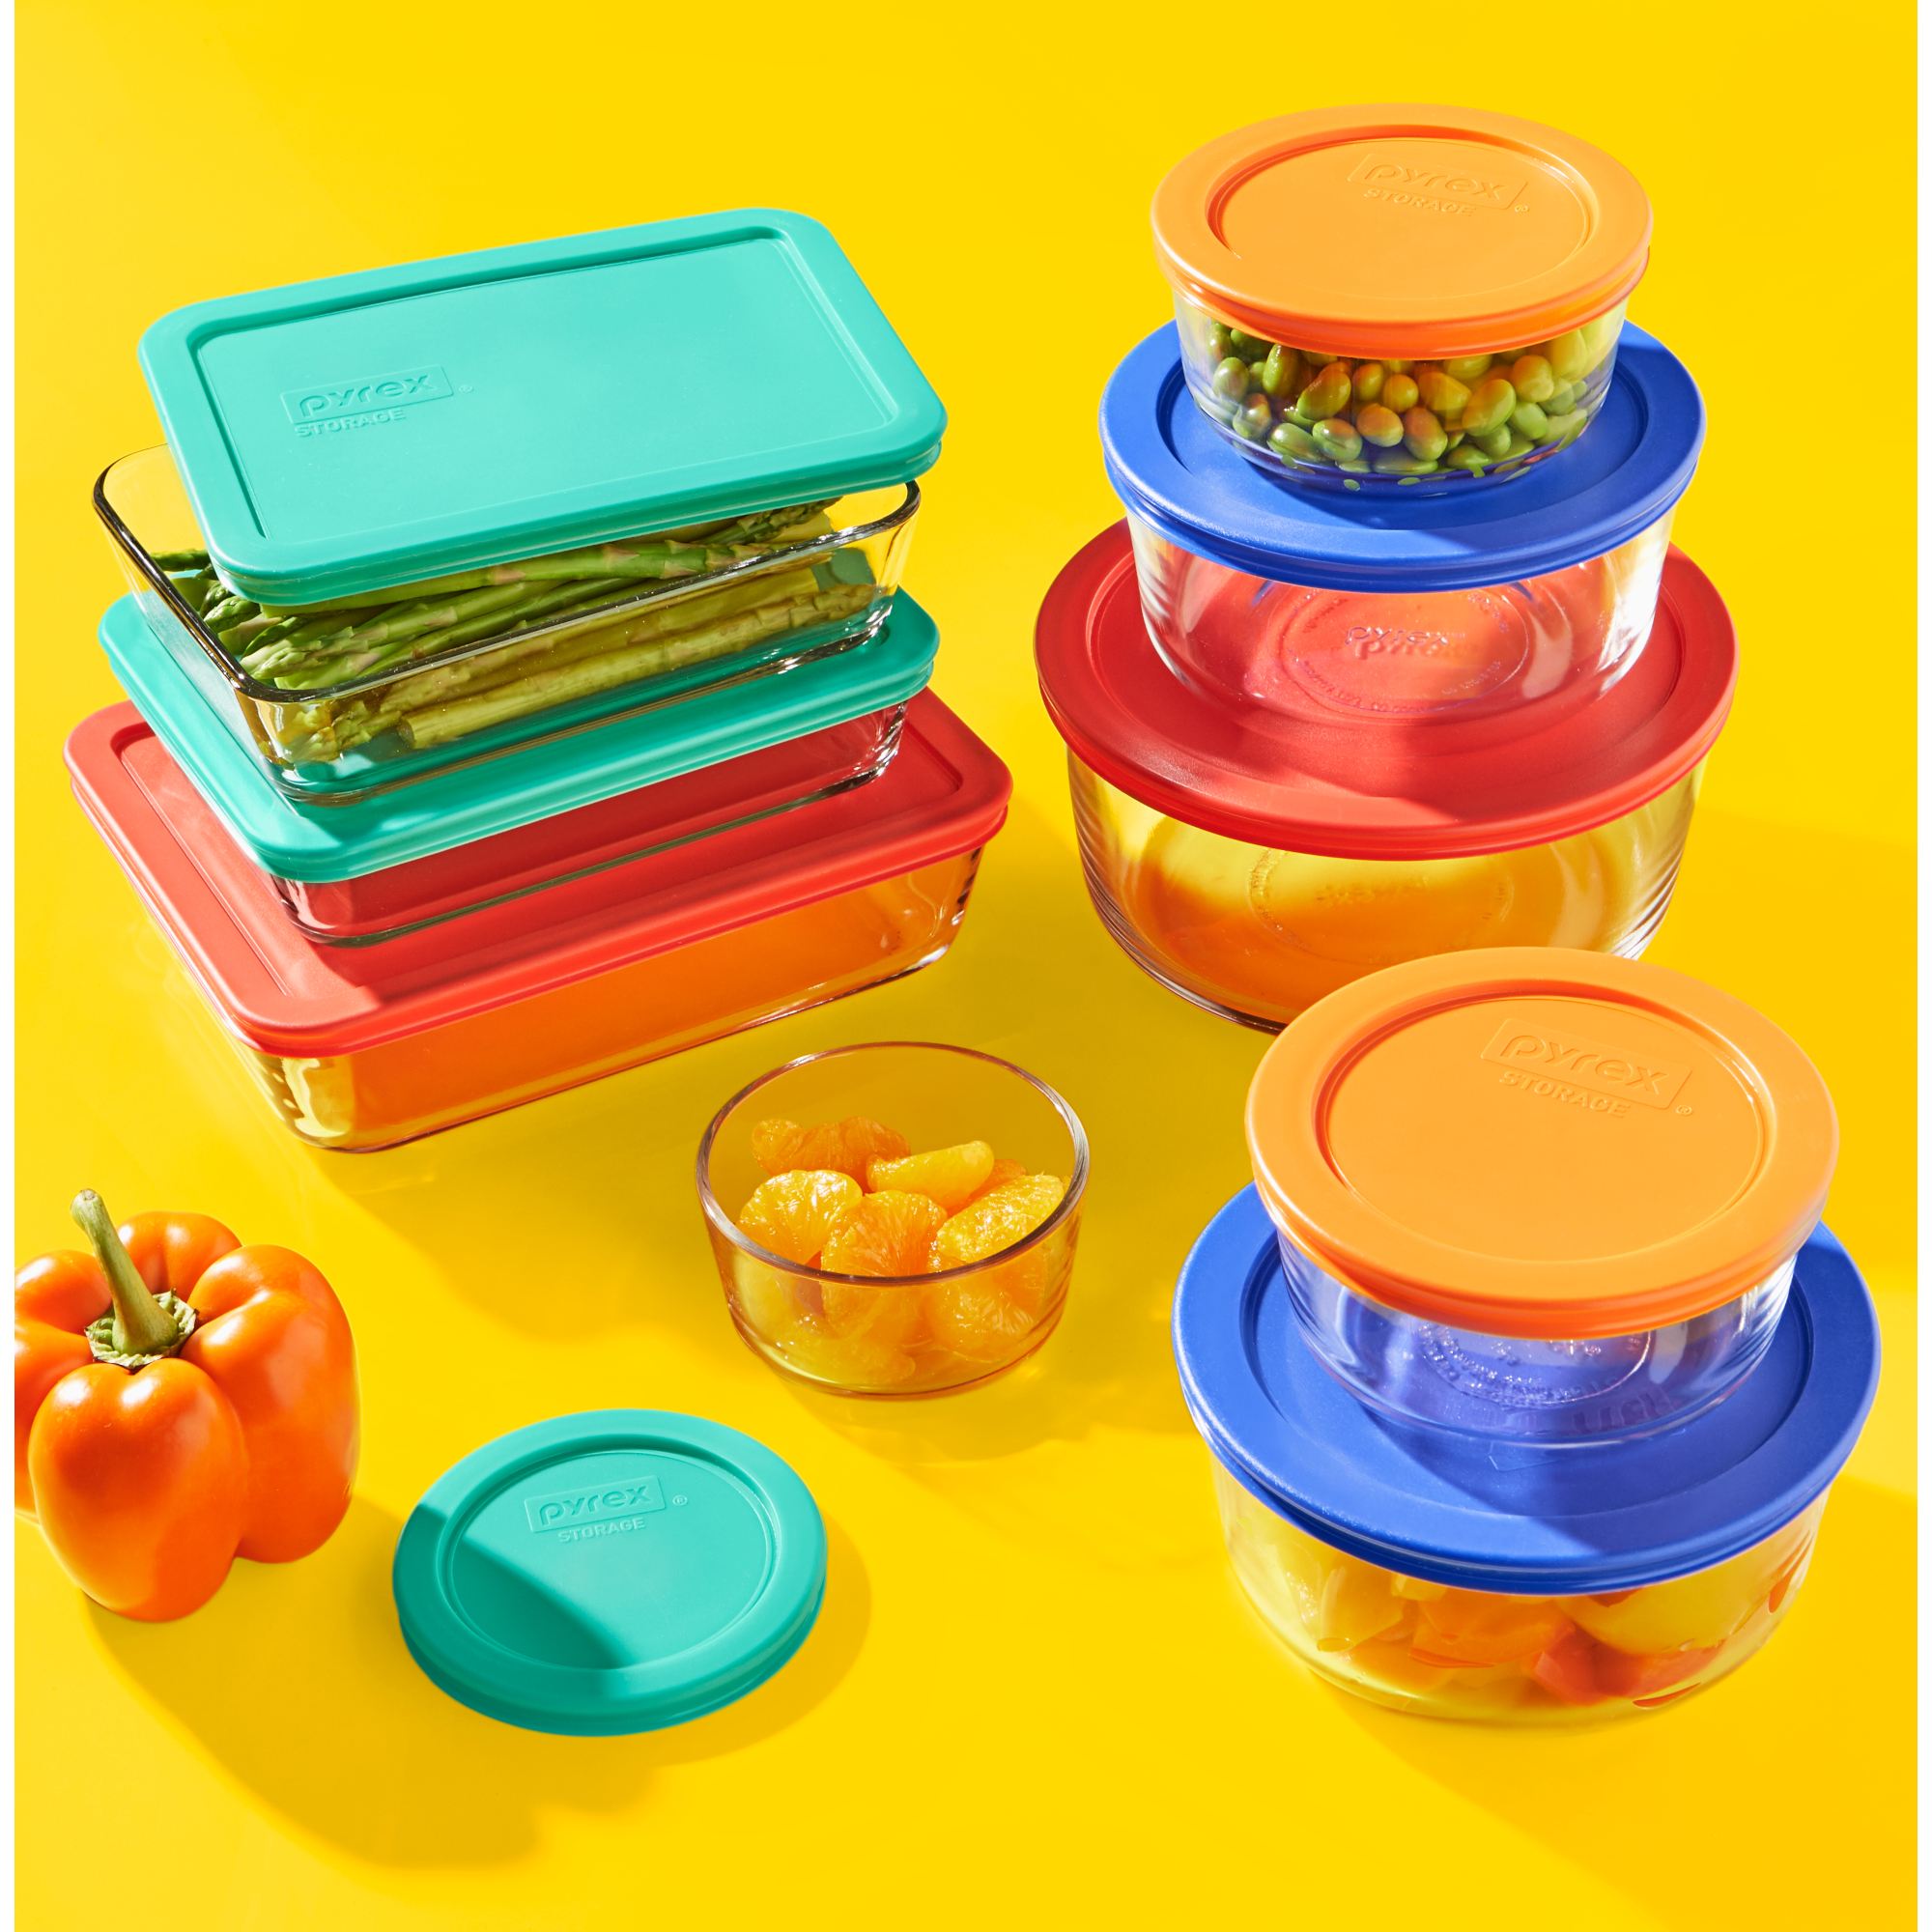 Pyrex 18-piece Glass Food Storage Container Set with Lids - image 4 of 9